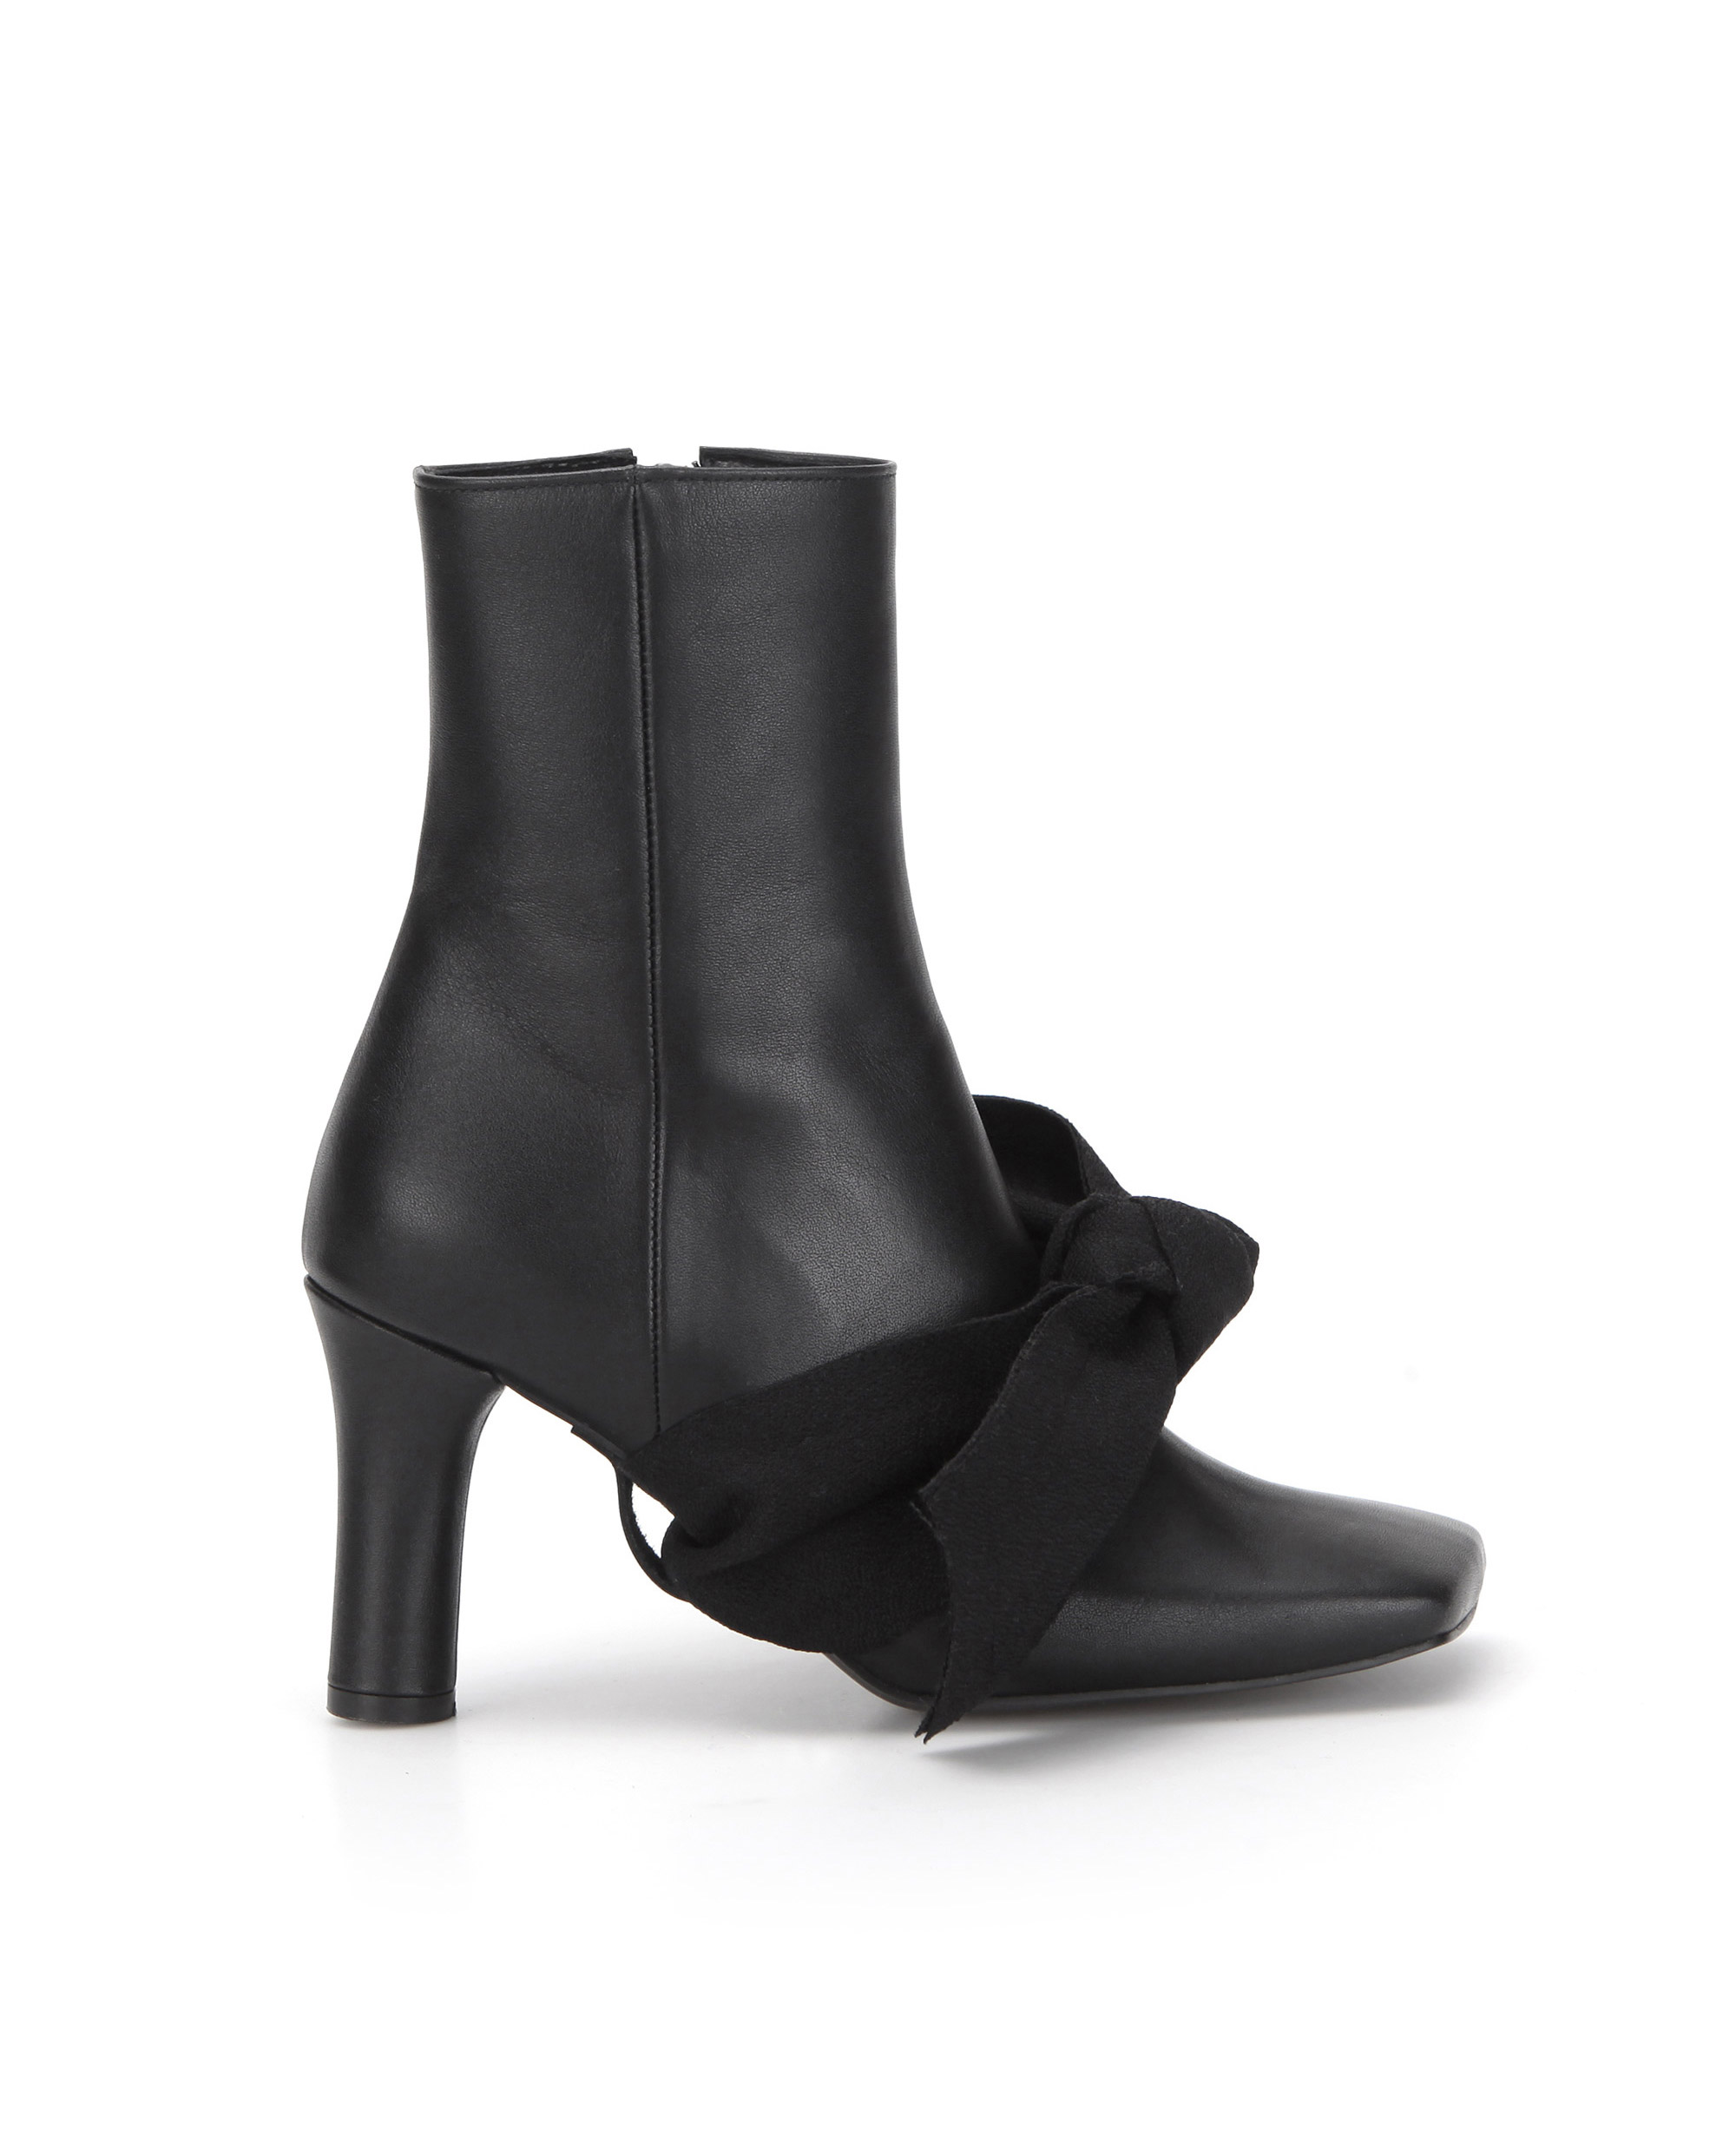 Squared toe boot with removable front ties | Black